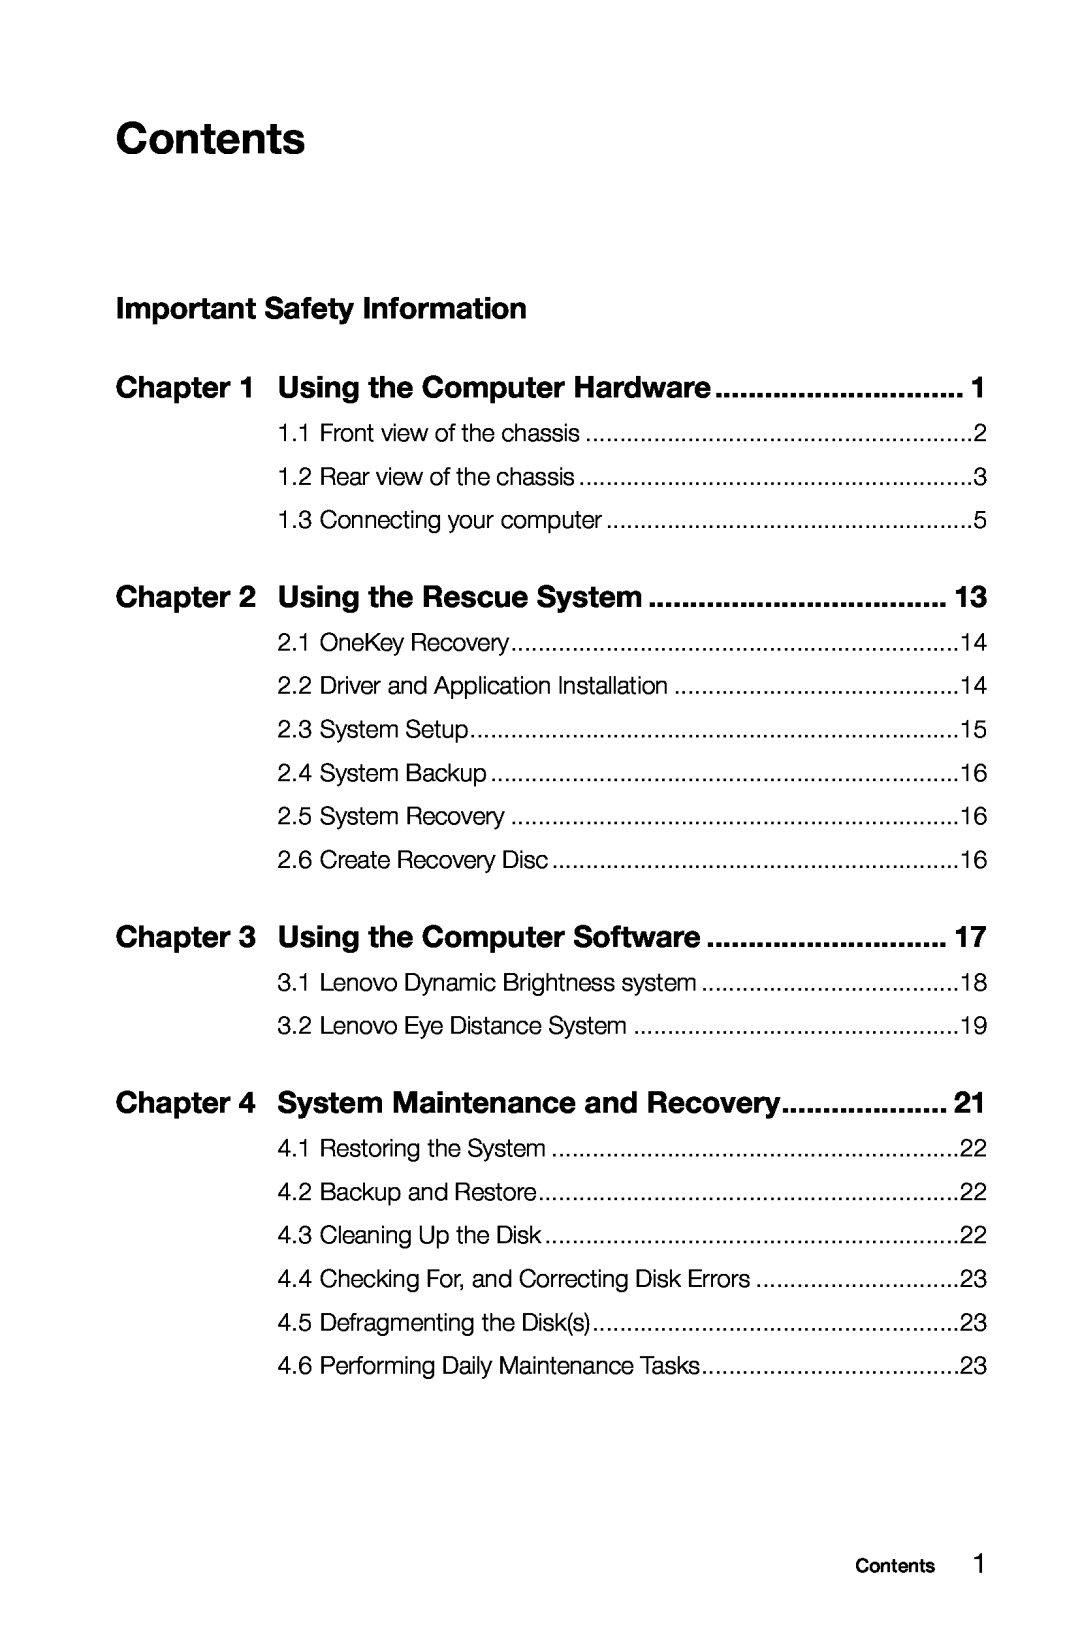 Lenovo 10041-10049 manual Contents, Important Safety Information, Using the Rescue System, Using the Computer Software 